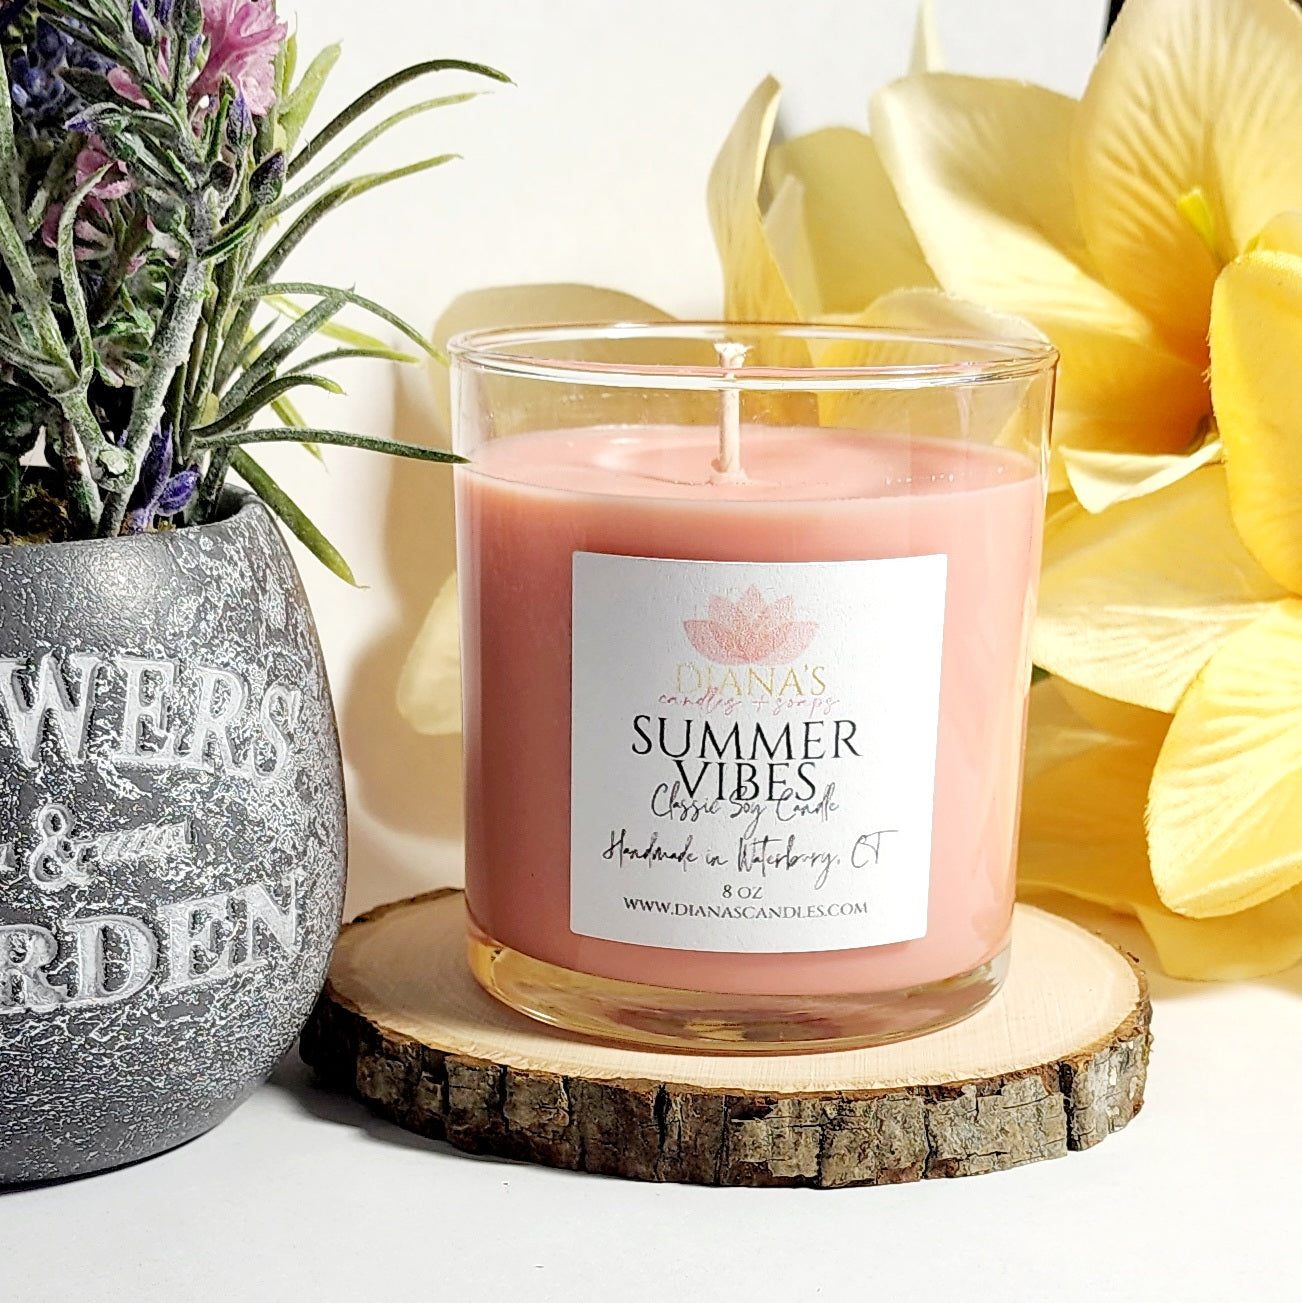 Summer Vibes Candle Diana's Candles and Soaps